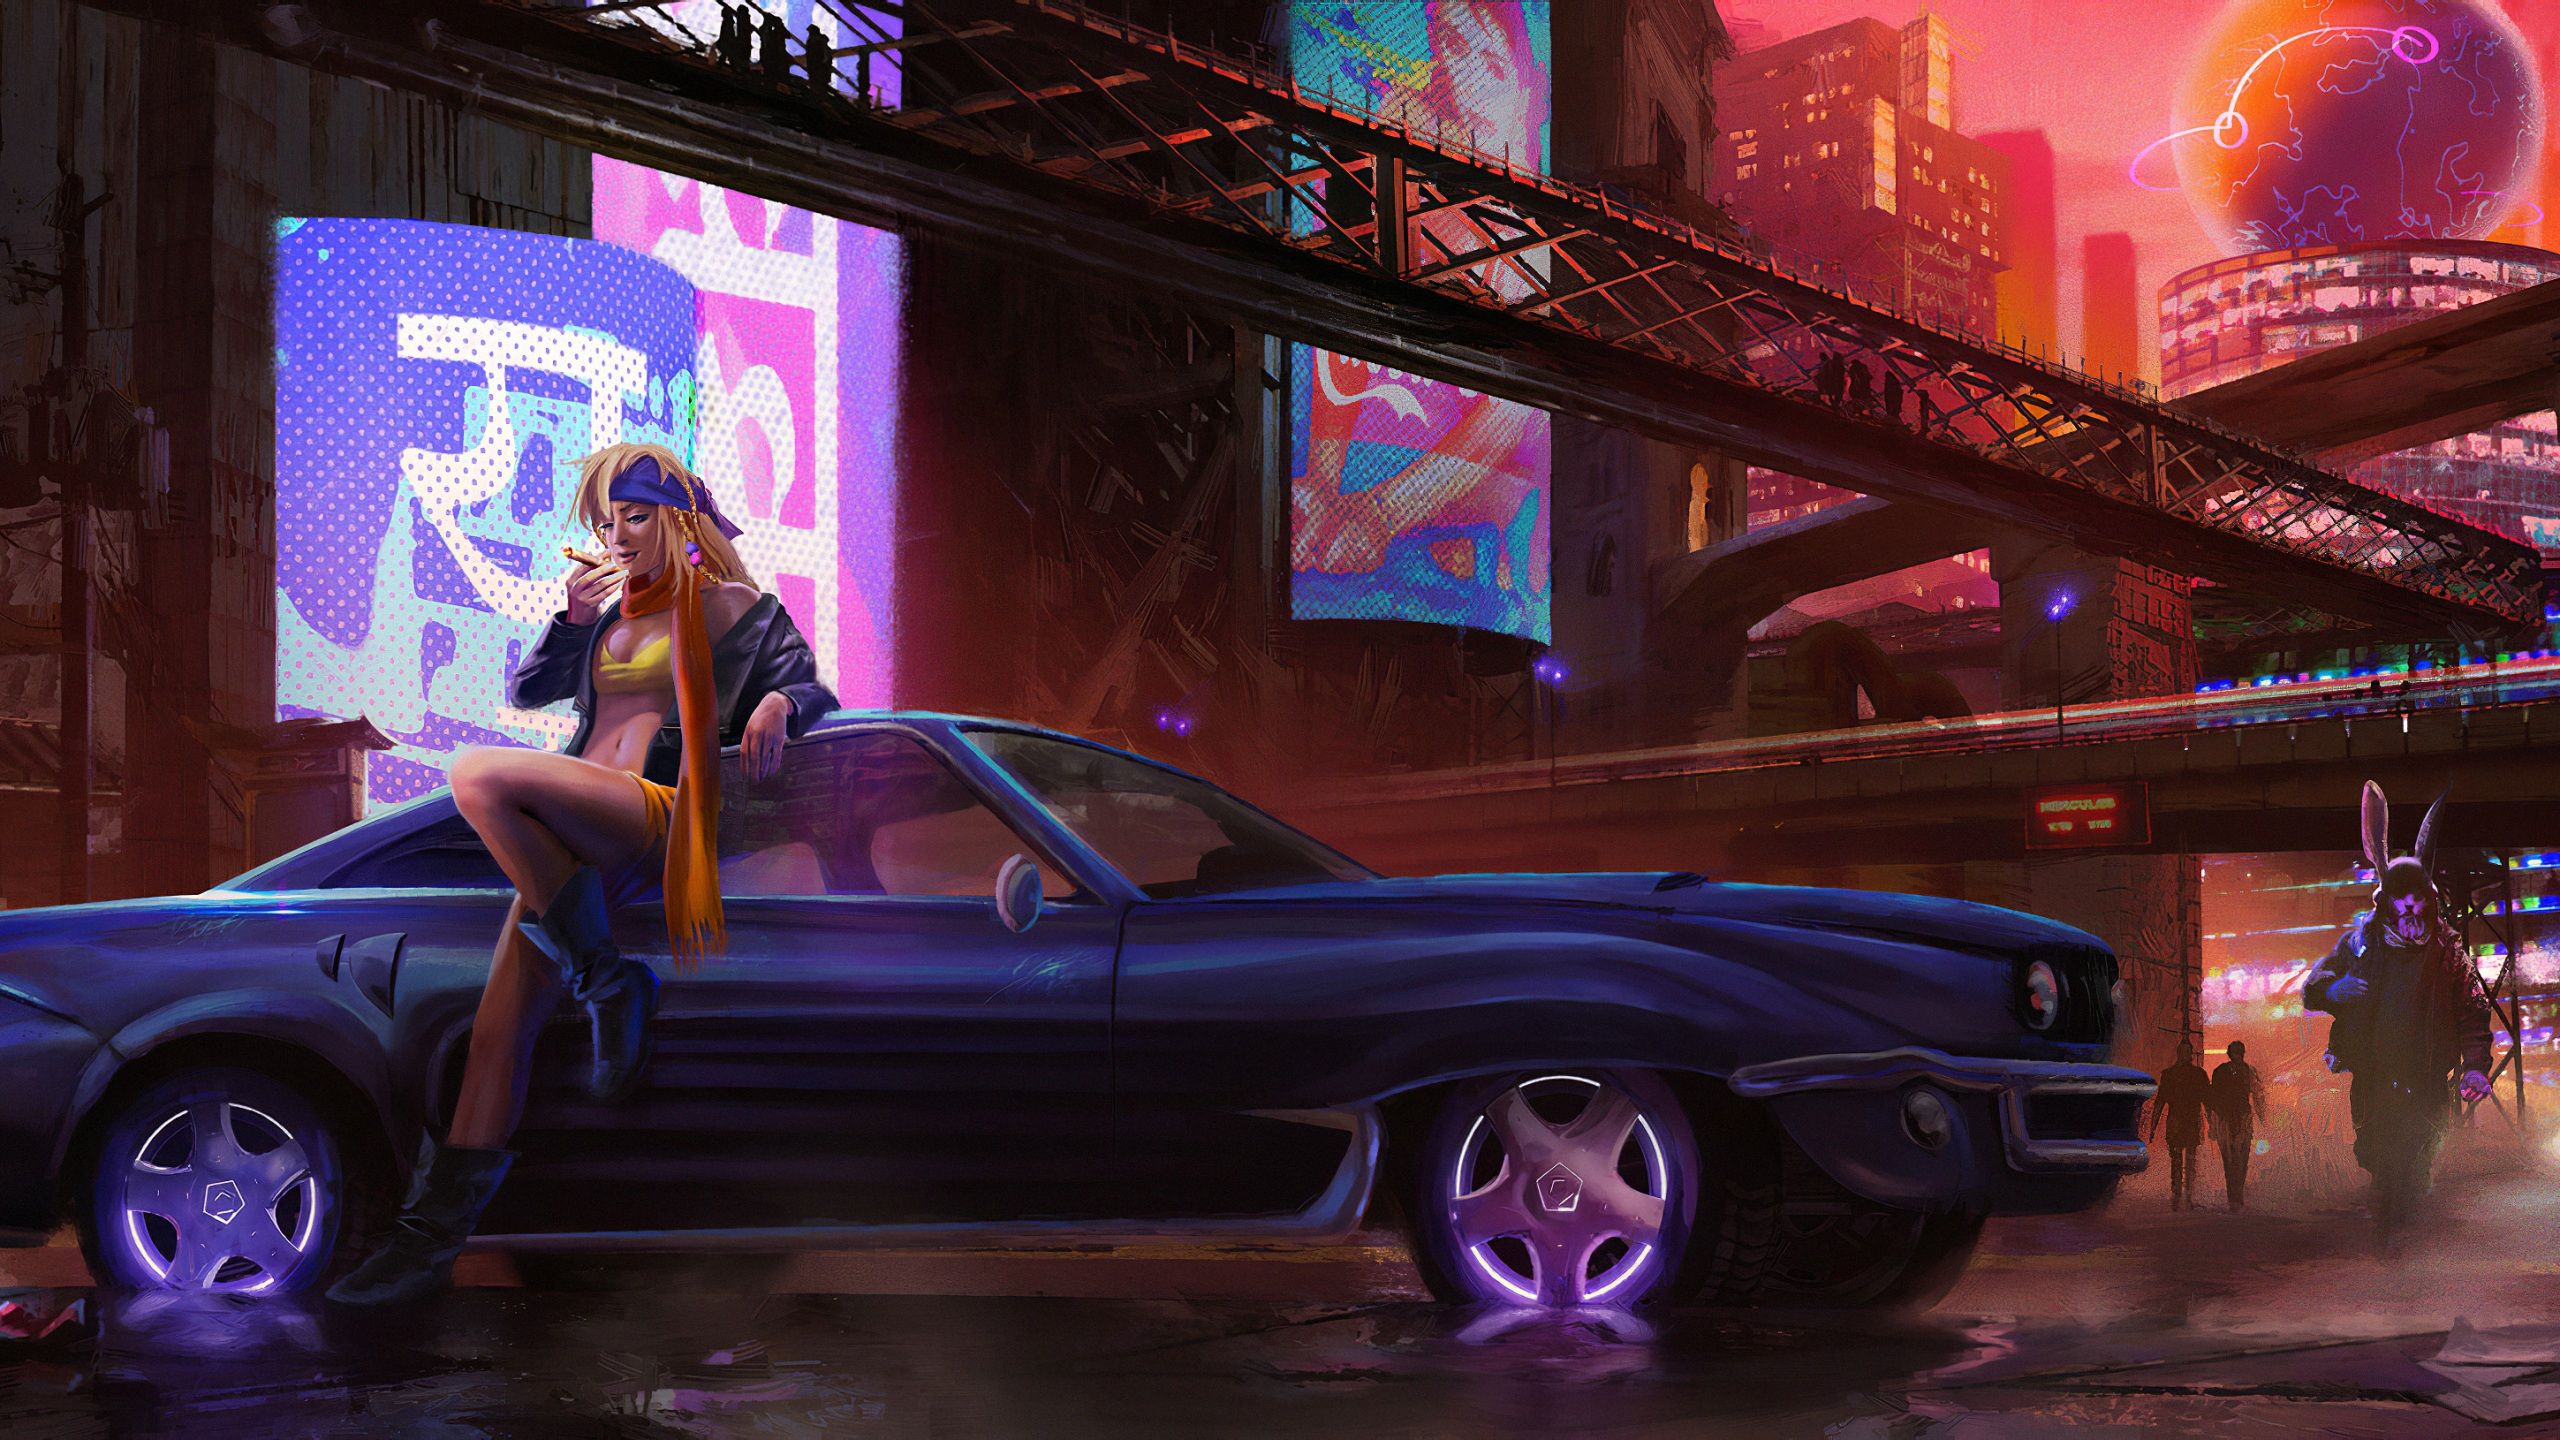 Wallpaper 4k Cyber City Girl With Car